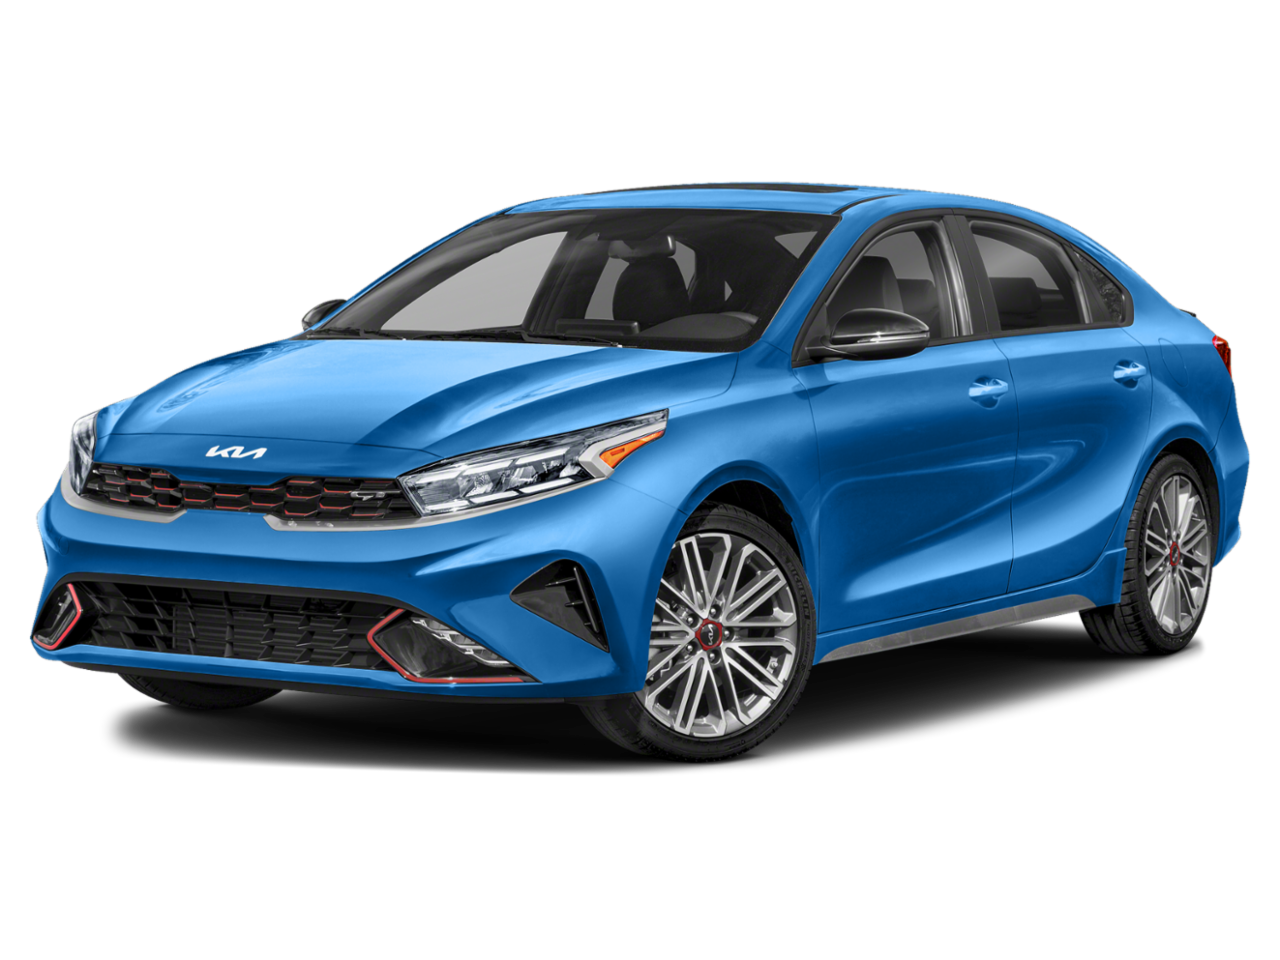 New Kia Forte from your Peoria, IL dealership, Mike Miller Auto Park.